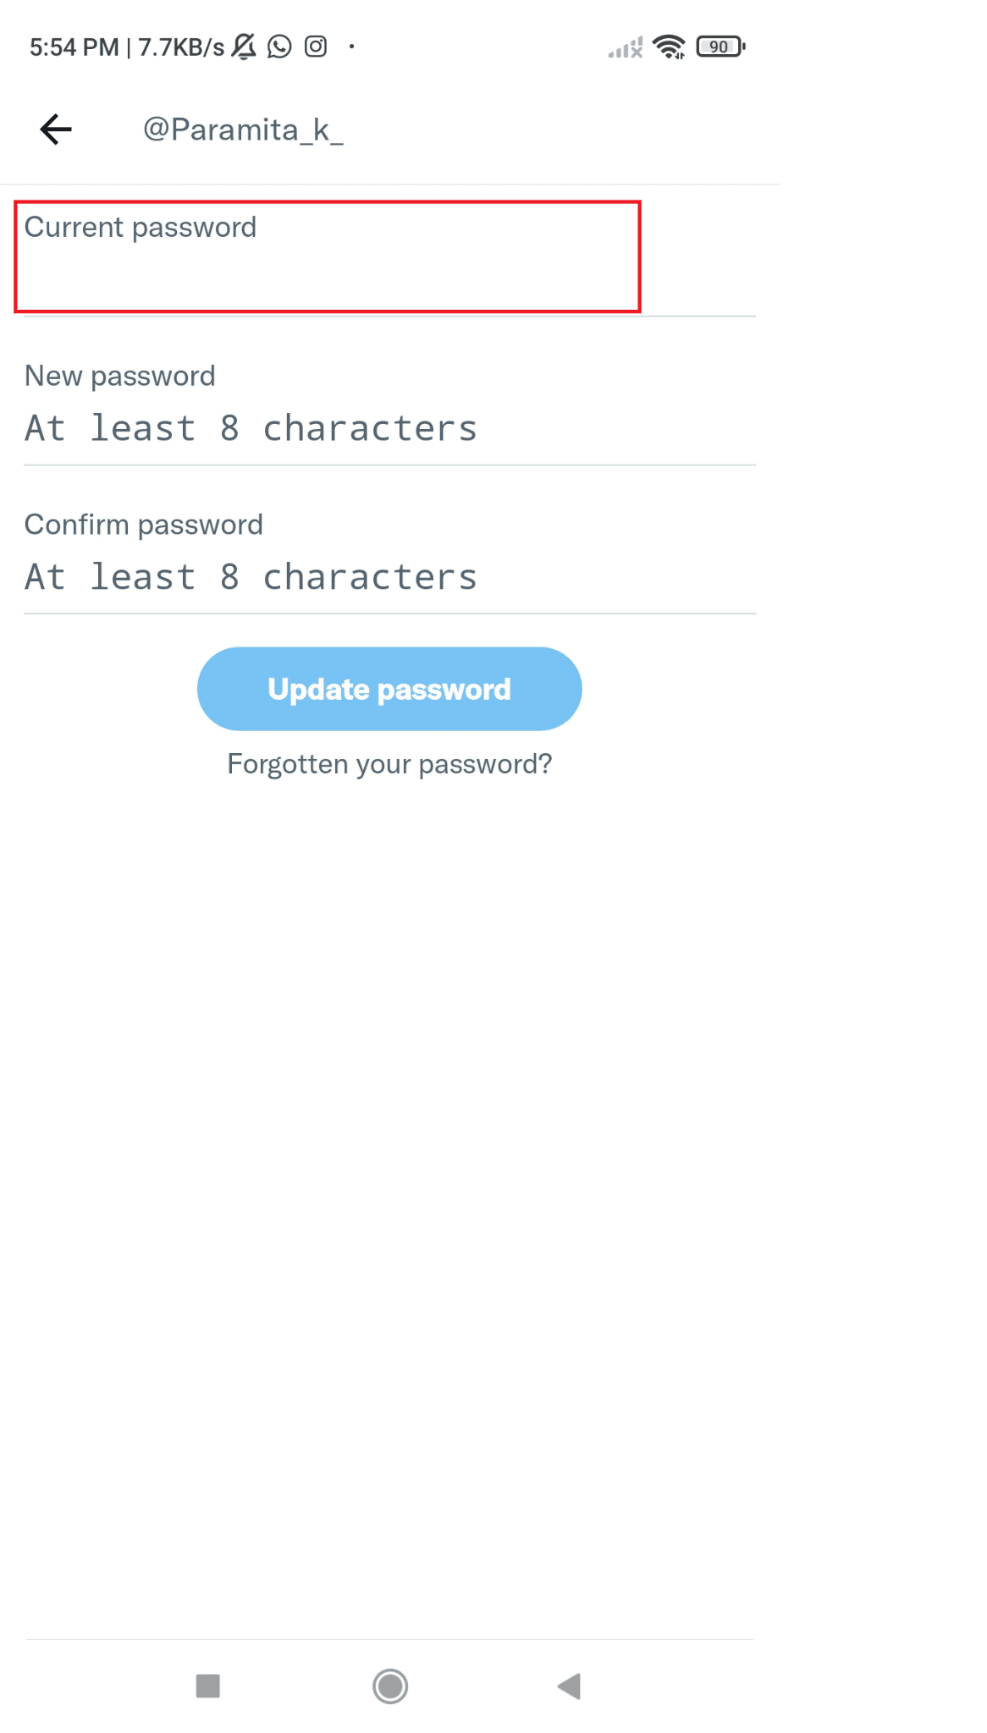 Enter your current password followed by your new password